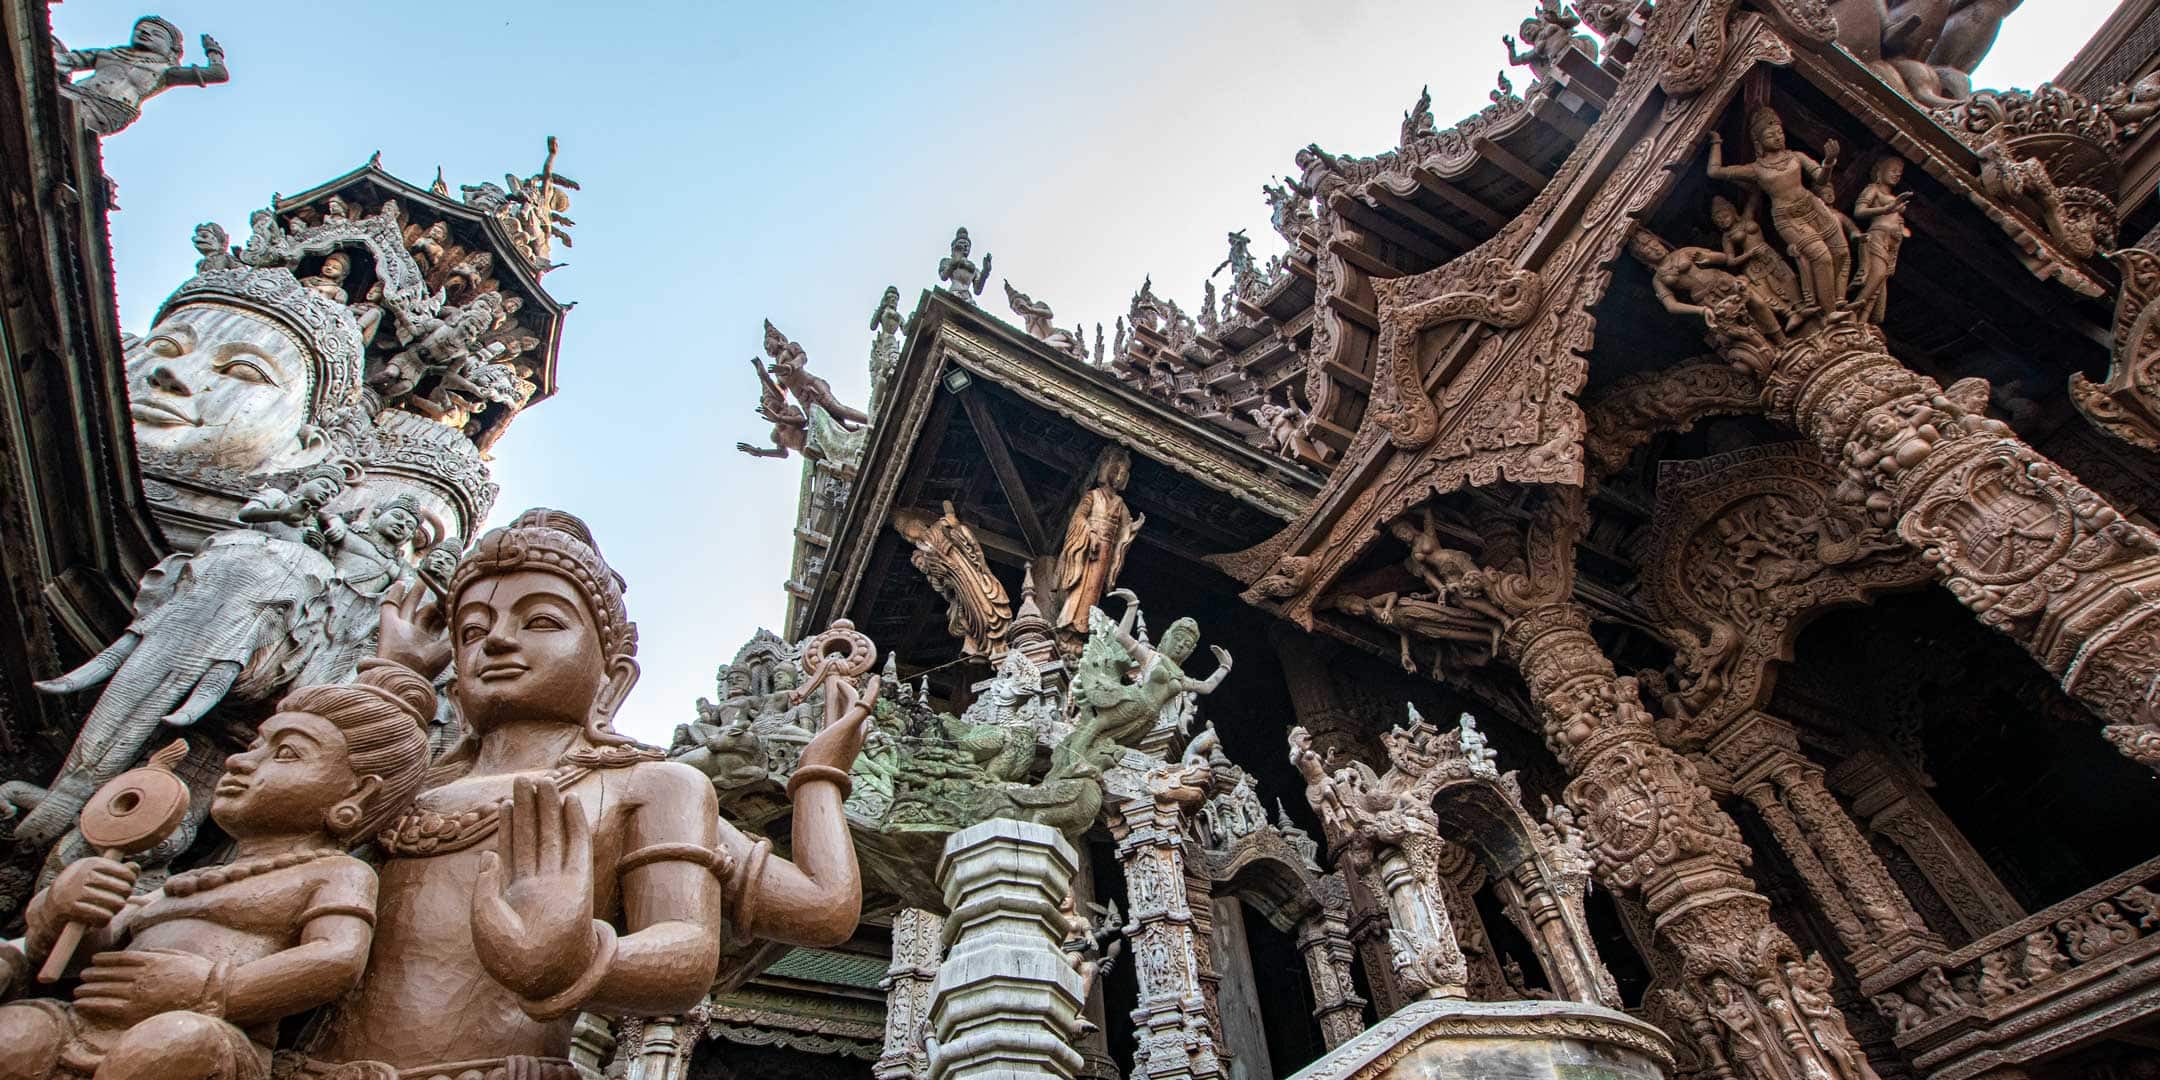 The Best Temples in Pattaya